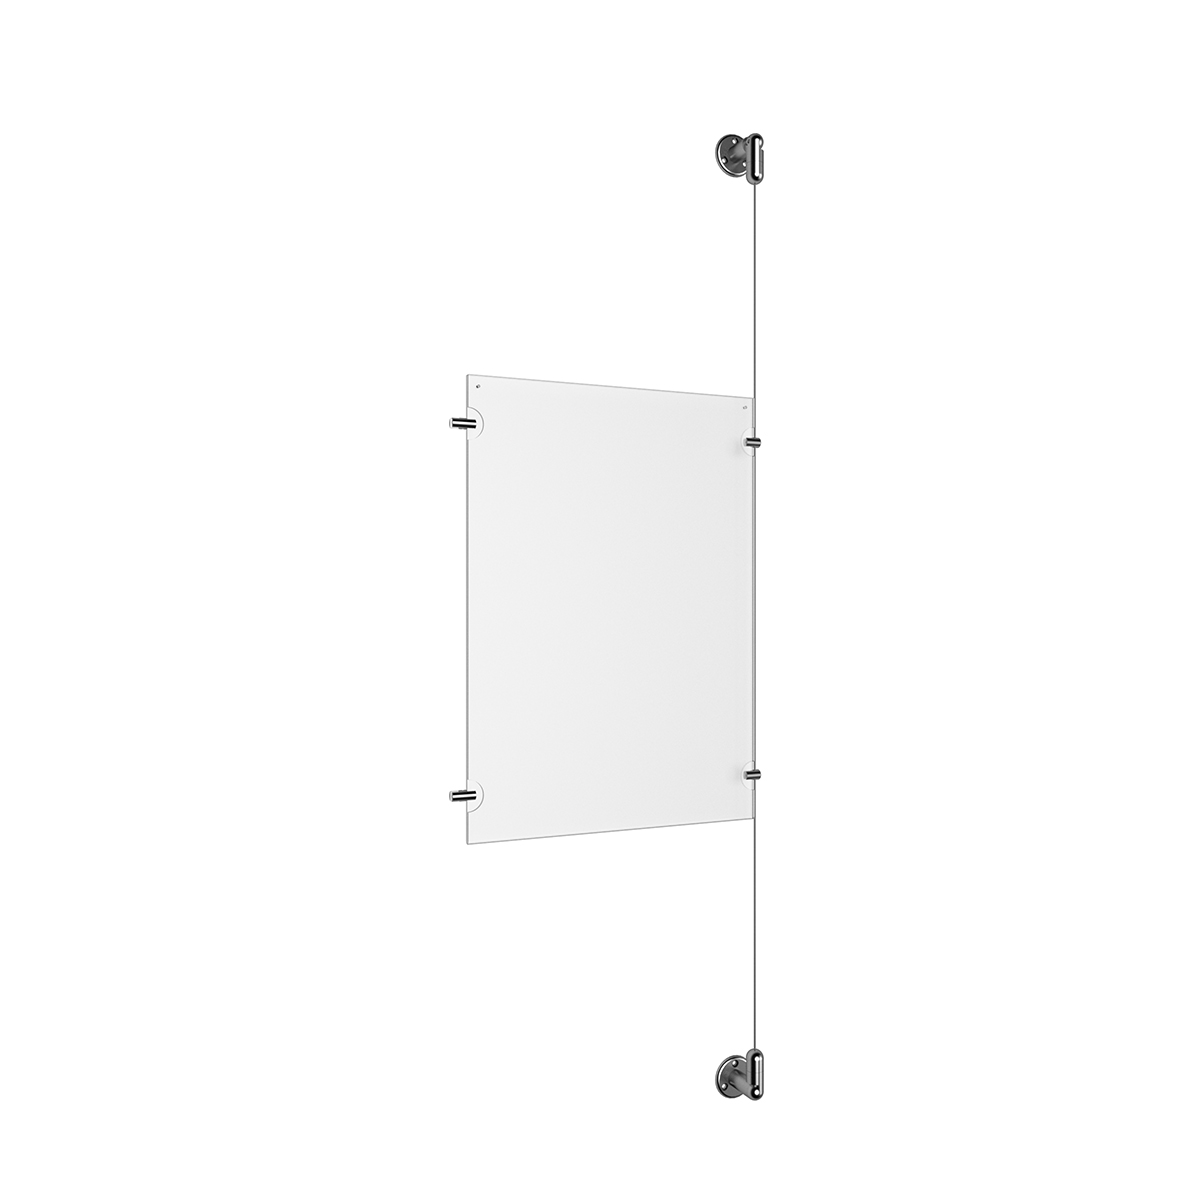 (1) 11'' Width x 17'' Height Clear Acrylic Frame & (1) Aluminum Clear Anodized Adjustable Angle Cable Systems with (2) Single-Sided Panel Grippers (2) Double-Sided Panel Grippers